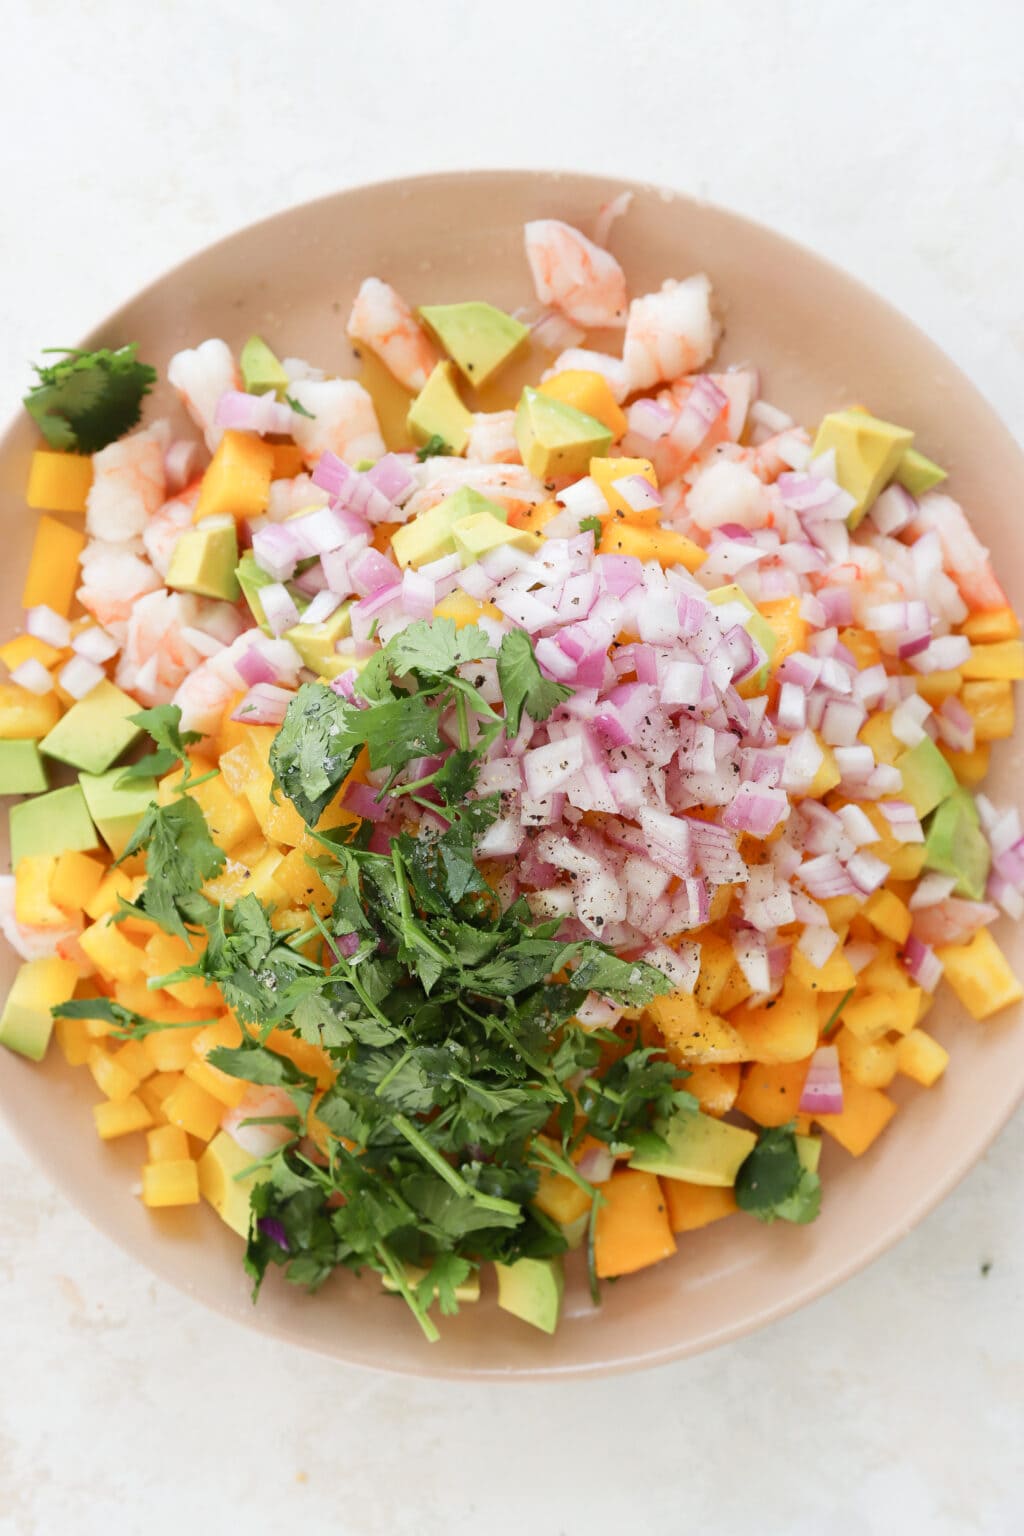 A pink plate with ingredients for a prawn ceviche, mango, avocado salad. The ingredients have not been mixed. There is cubed mango, chopped shrimp, cubed avocado, diced red onion, cilantro